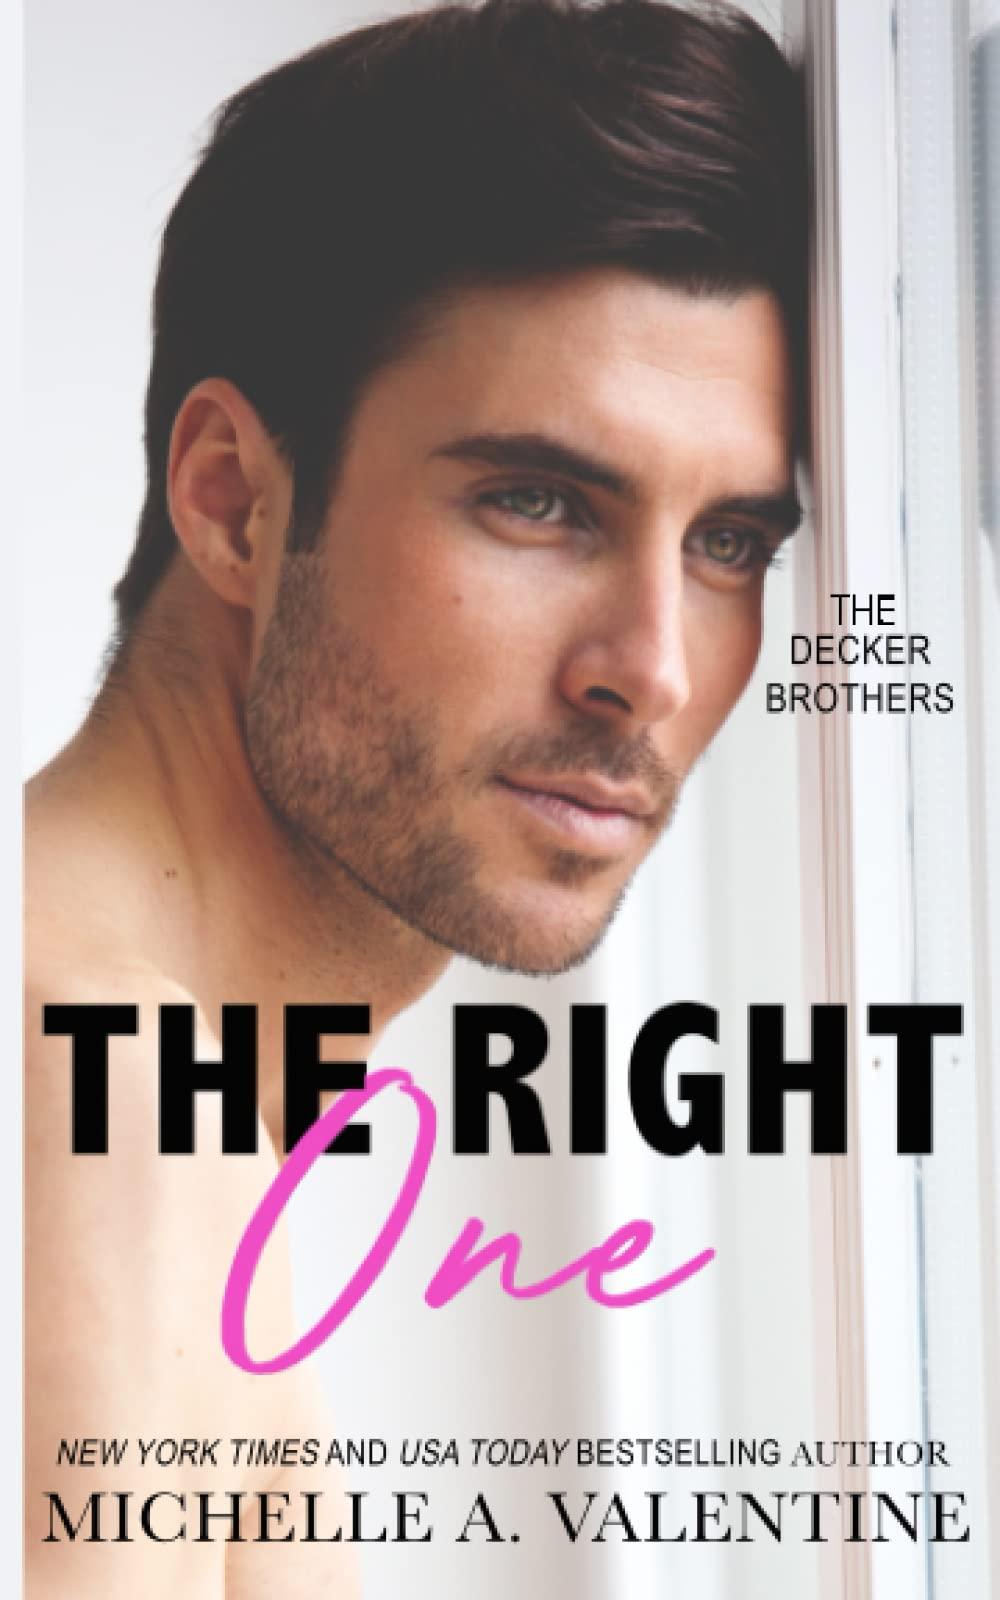 The Right One: A Single-Dad, Second Chance Romance